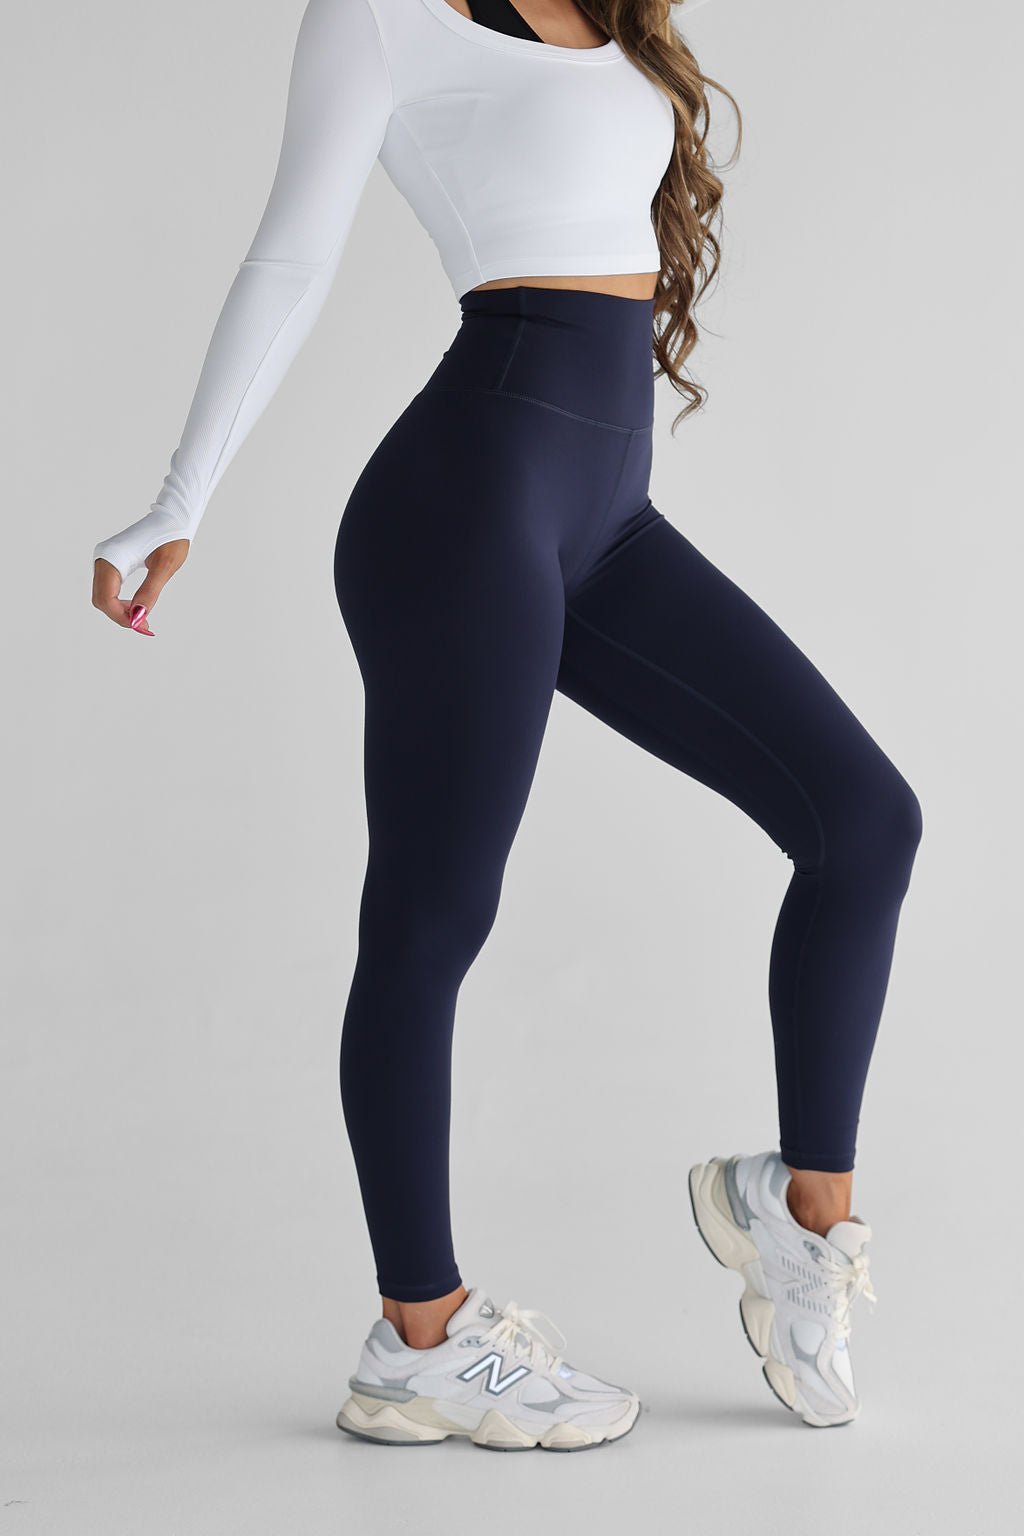 Midnight Blue Full Length Leggings, High Waisted and 5 Star Rated